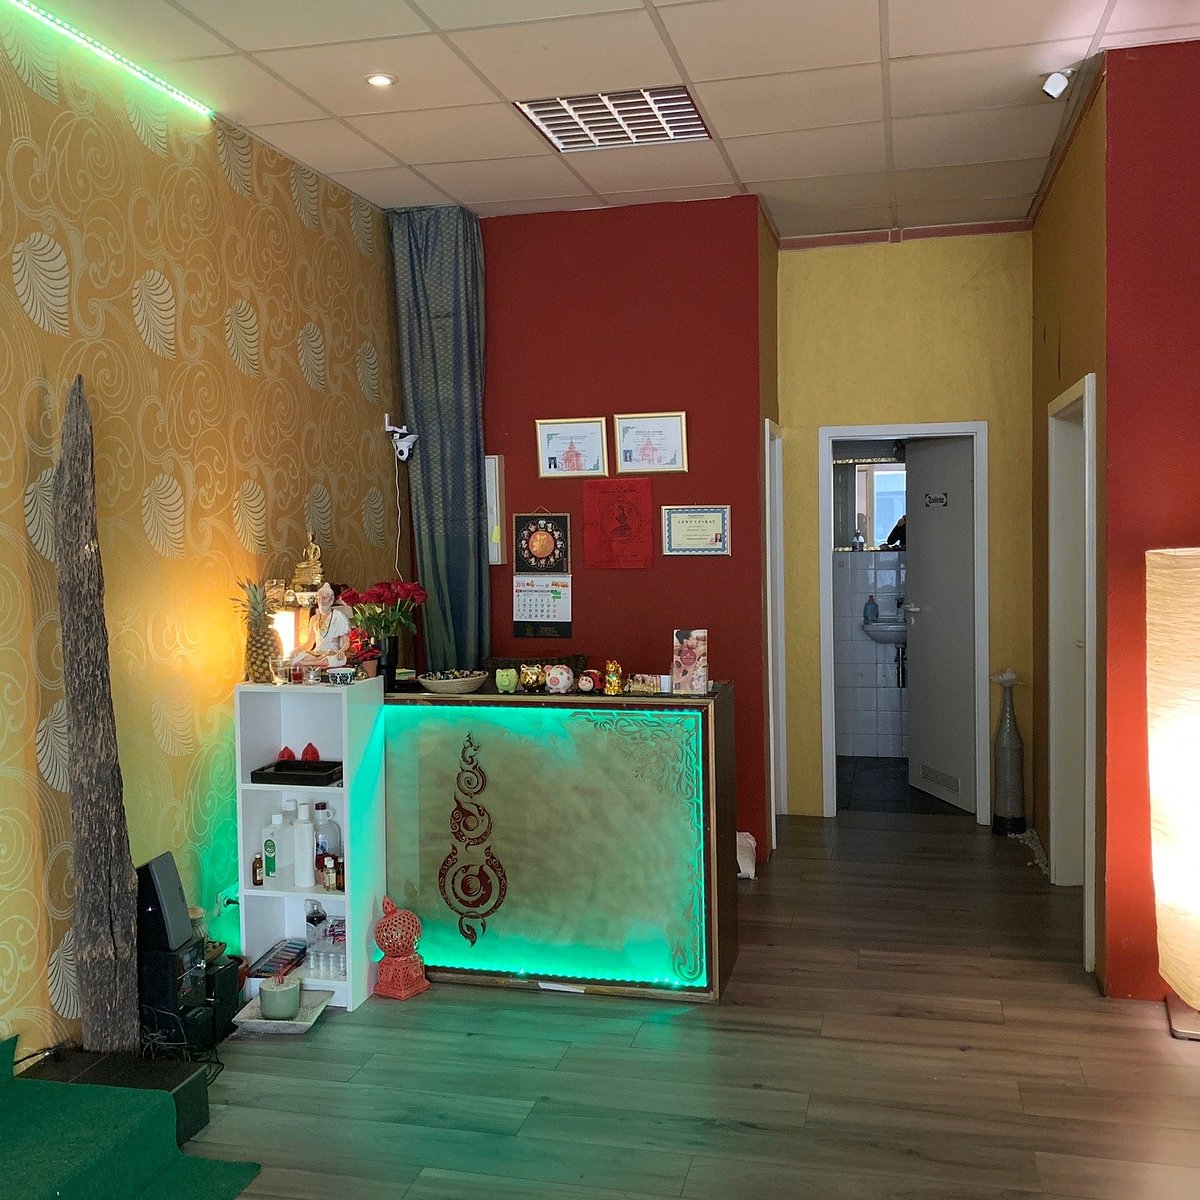 Golden Hands Thai Massage Wiesbaden All You Need To Know Before You Go